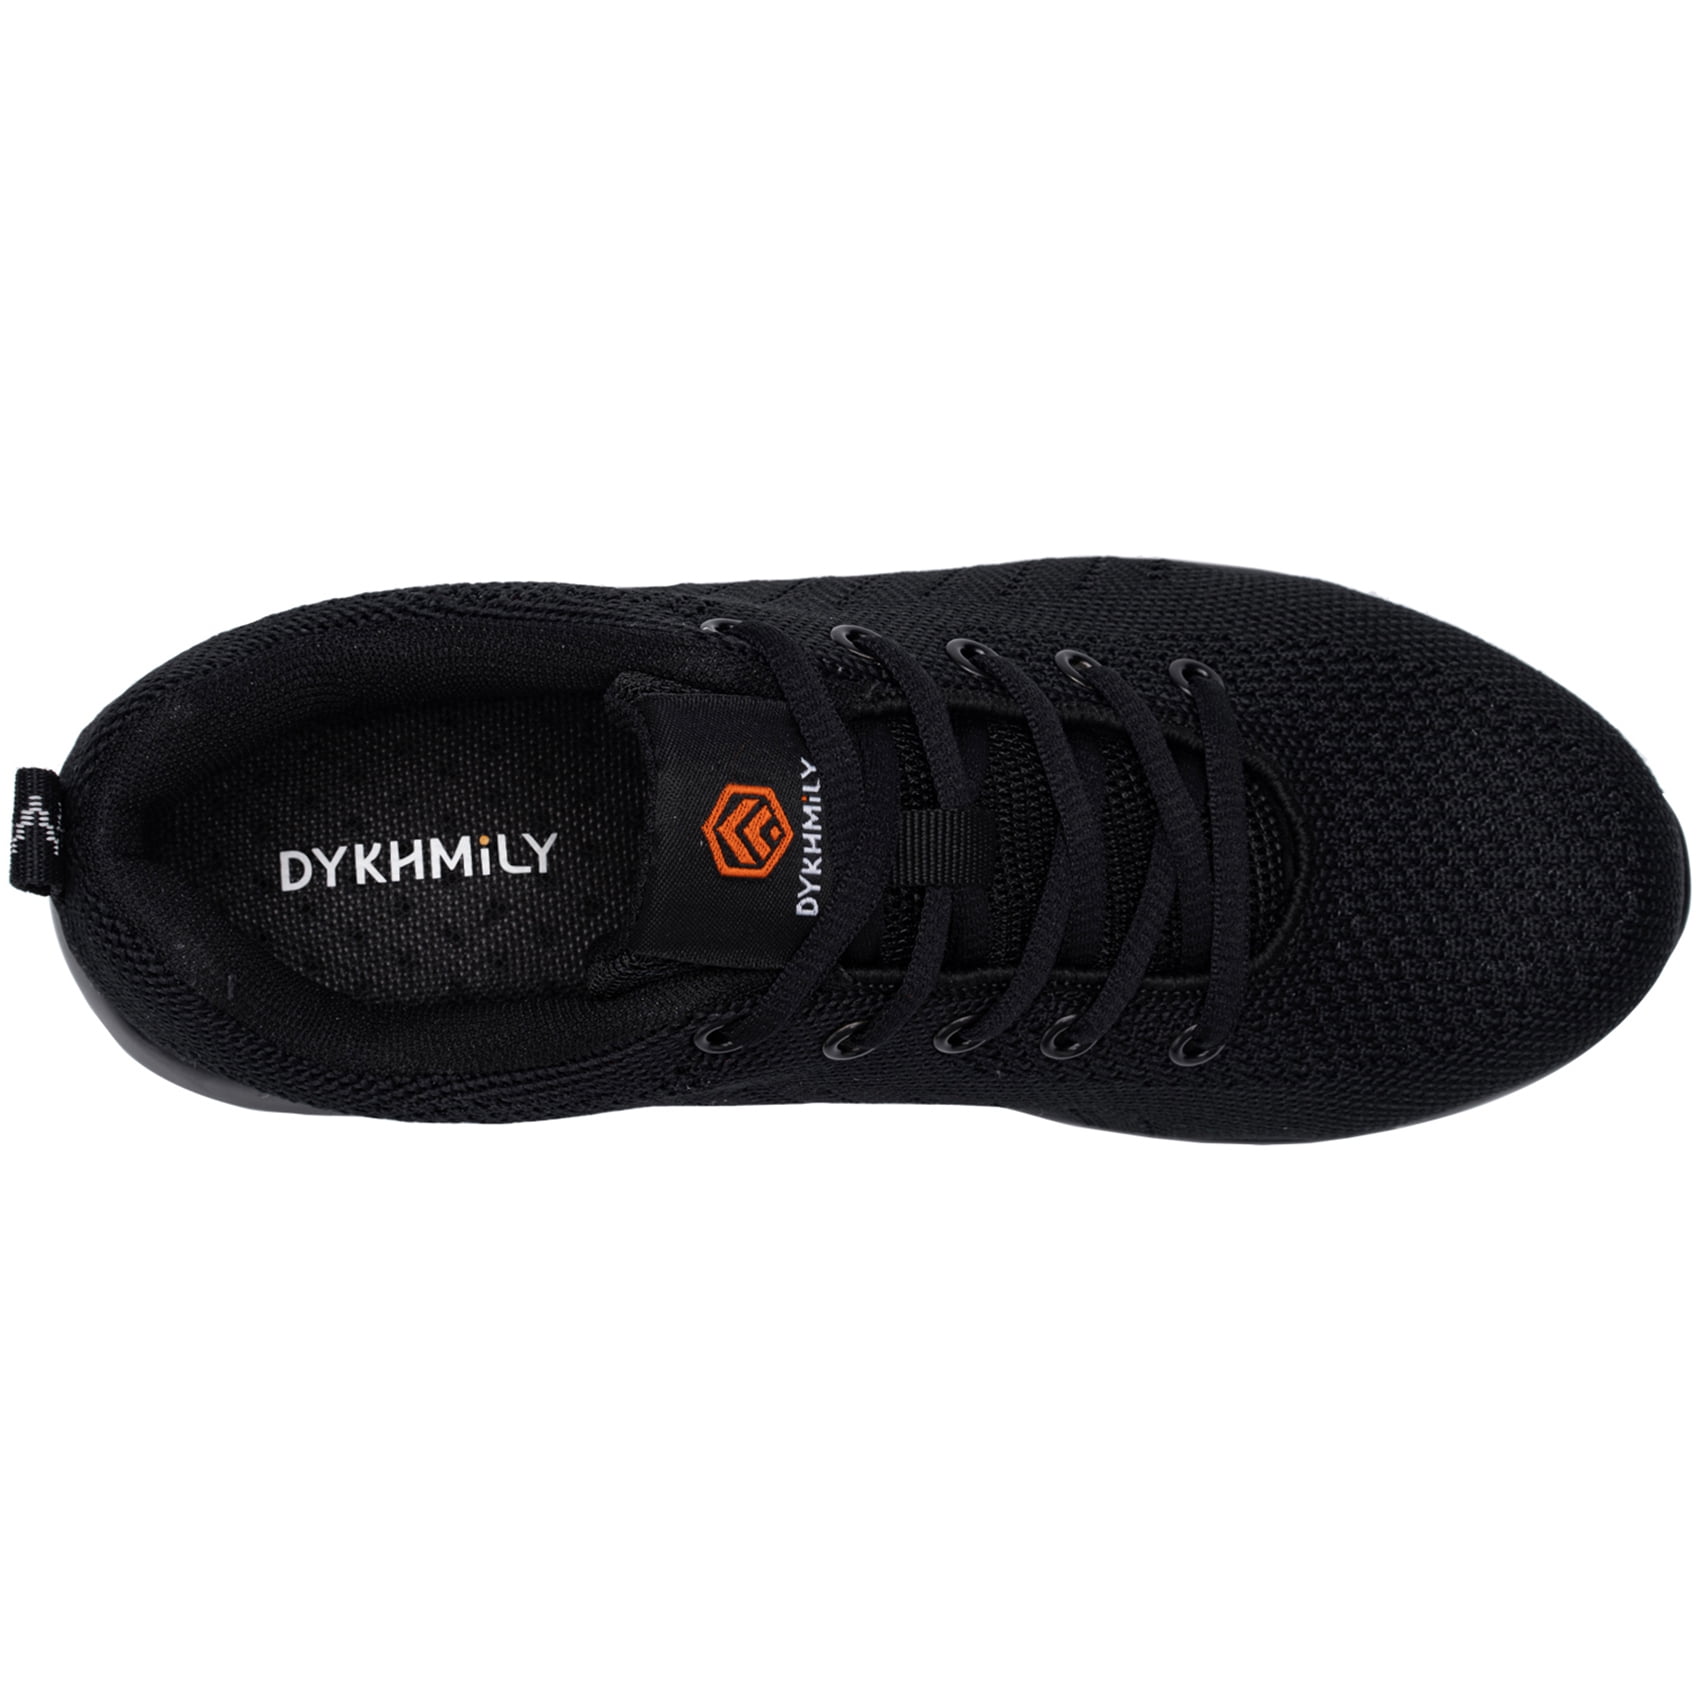 DYKHMILY Steel Toe Sneakers for Women Lightweight Slip on Breathable Work Shoes Cushion Safety Shoes Slip Resistant D868 